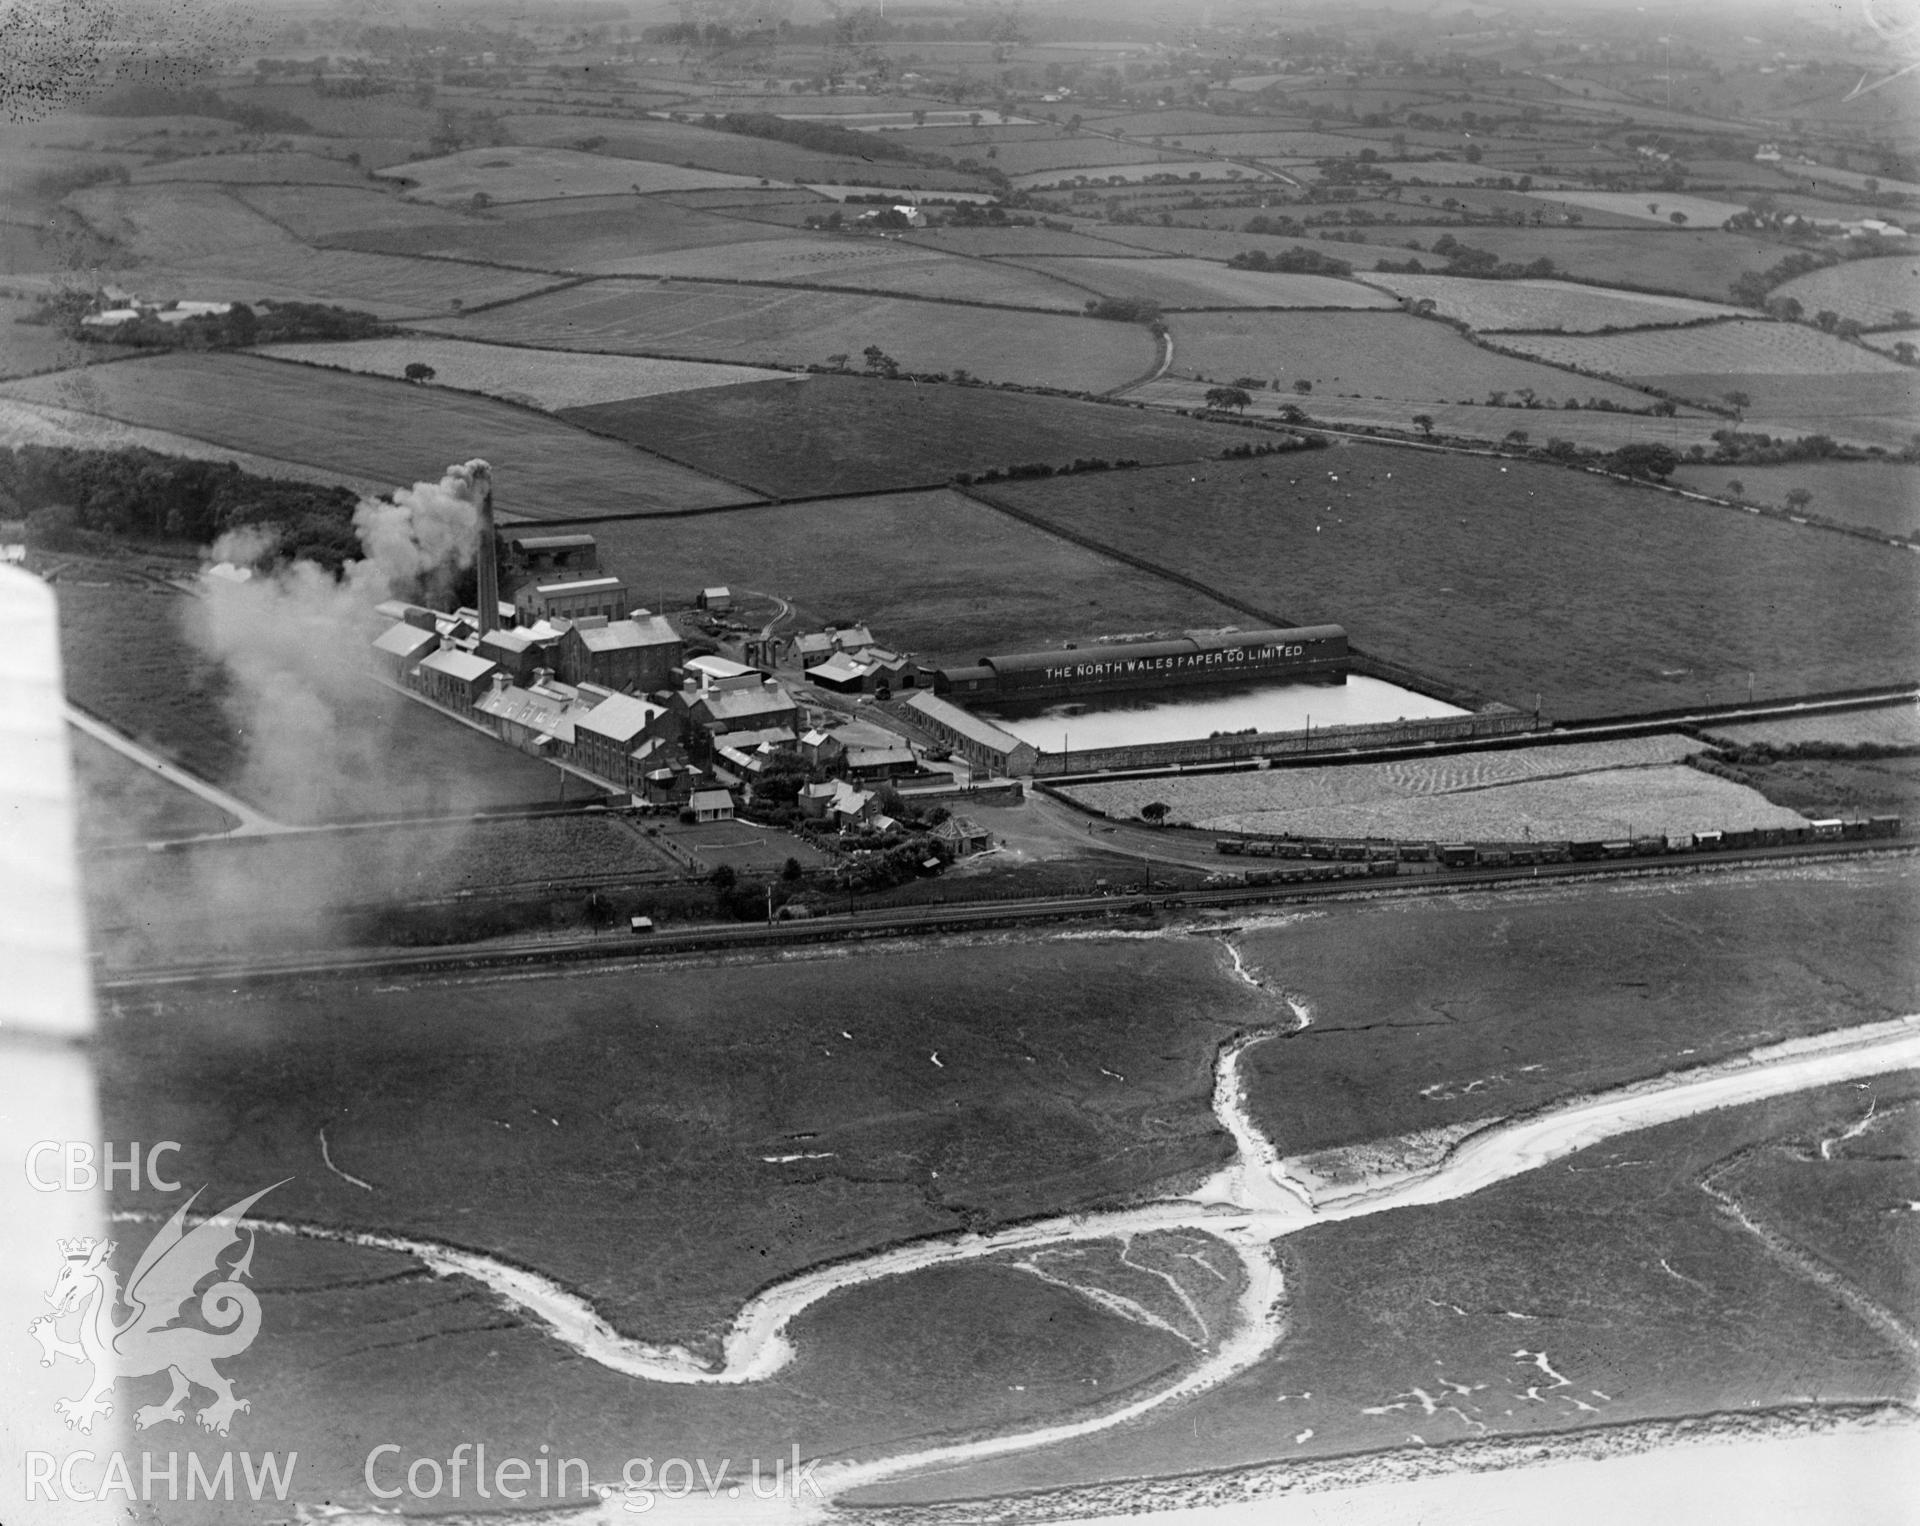 View of the North Wales Paper Company Ltd, Flint, oblique aerial view. 5?x4? black and white glass plate negative.